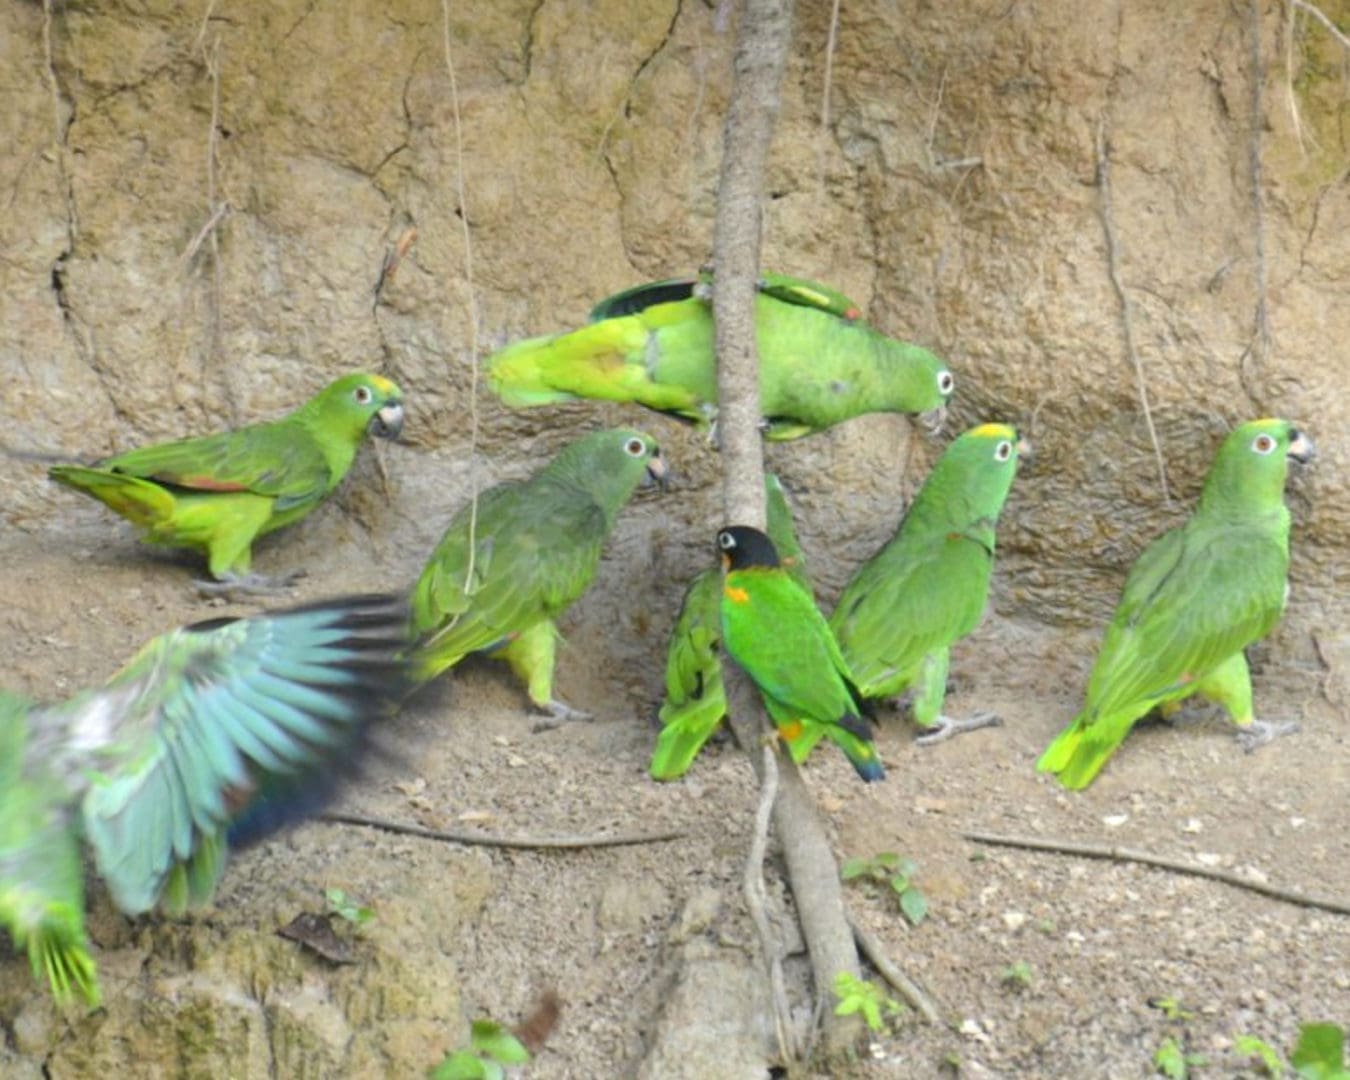 Green parrots pecking at soil in a clay lick